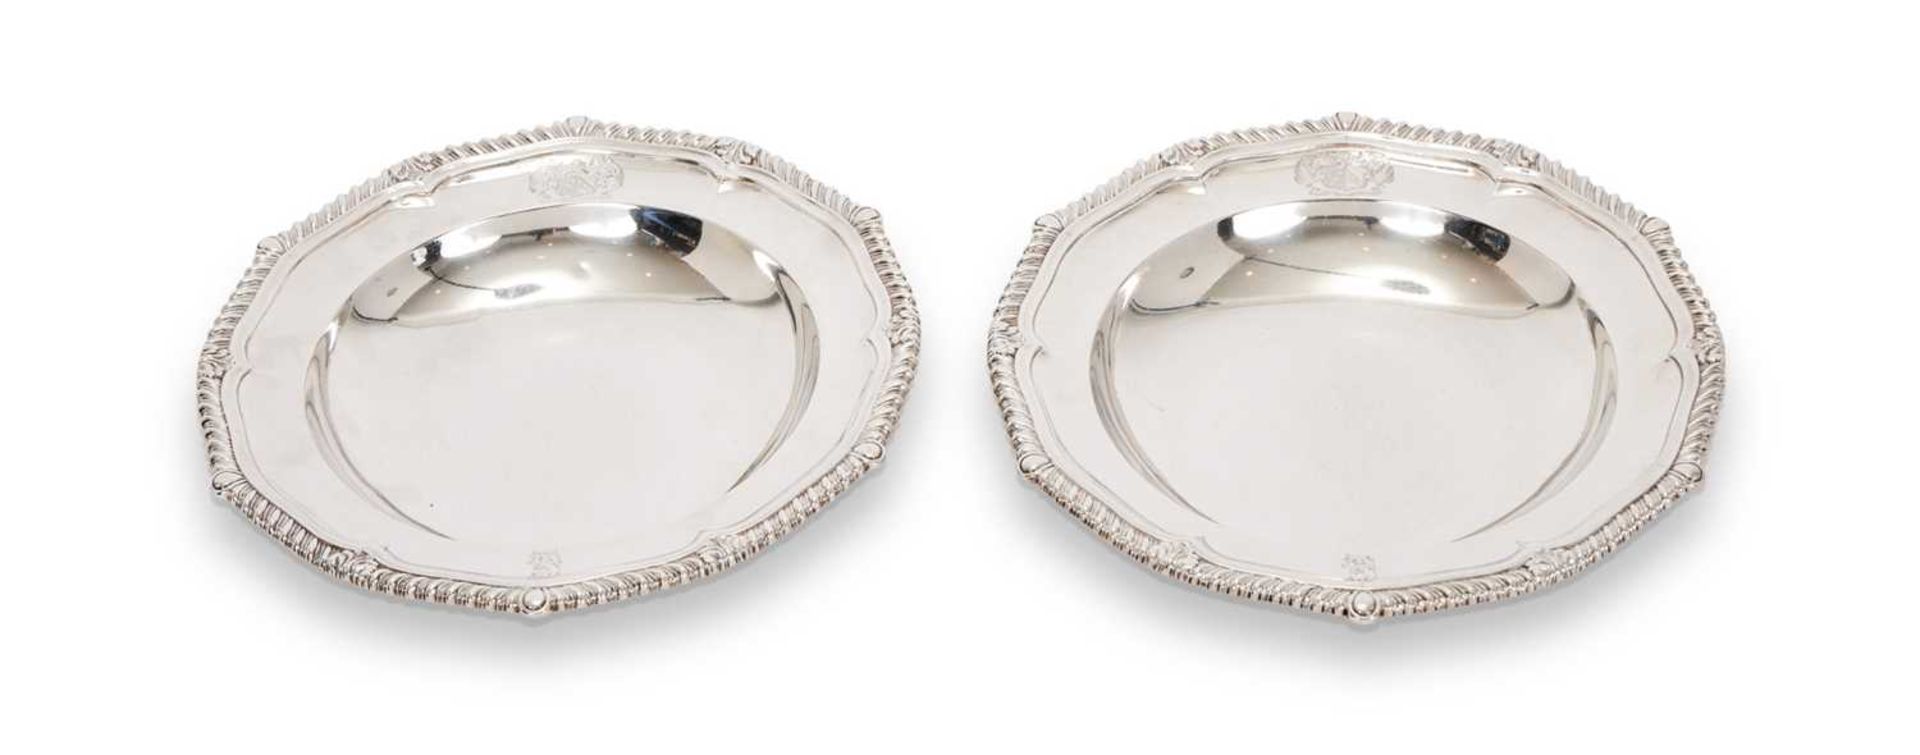 PAUL STORR: A PAIR OF REGENCY SILVER SERVING DISHES, LONDON, 1815, WITH BURDETT-COUTTS CREST - Bild 2 aus 3